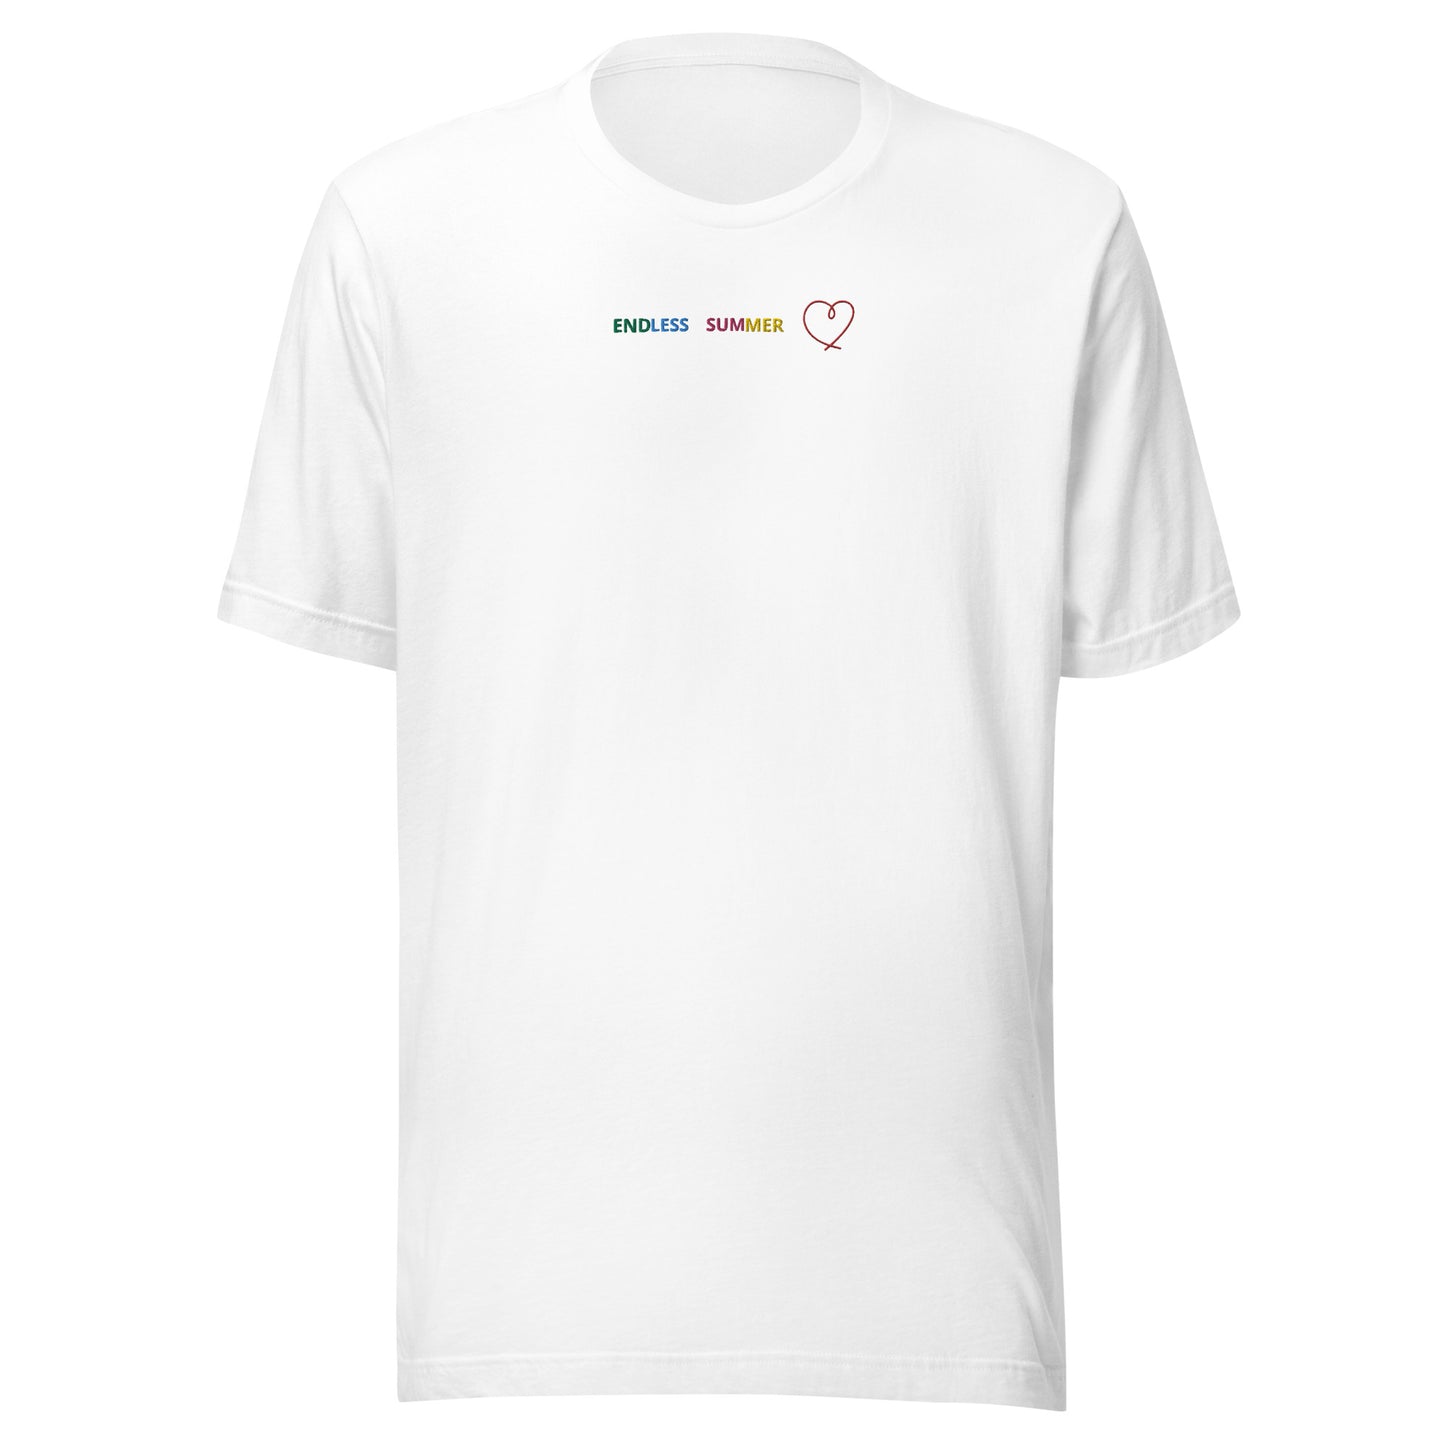 ENDLESS SUMMER LOVE - embroidered T-shirt